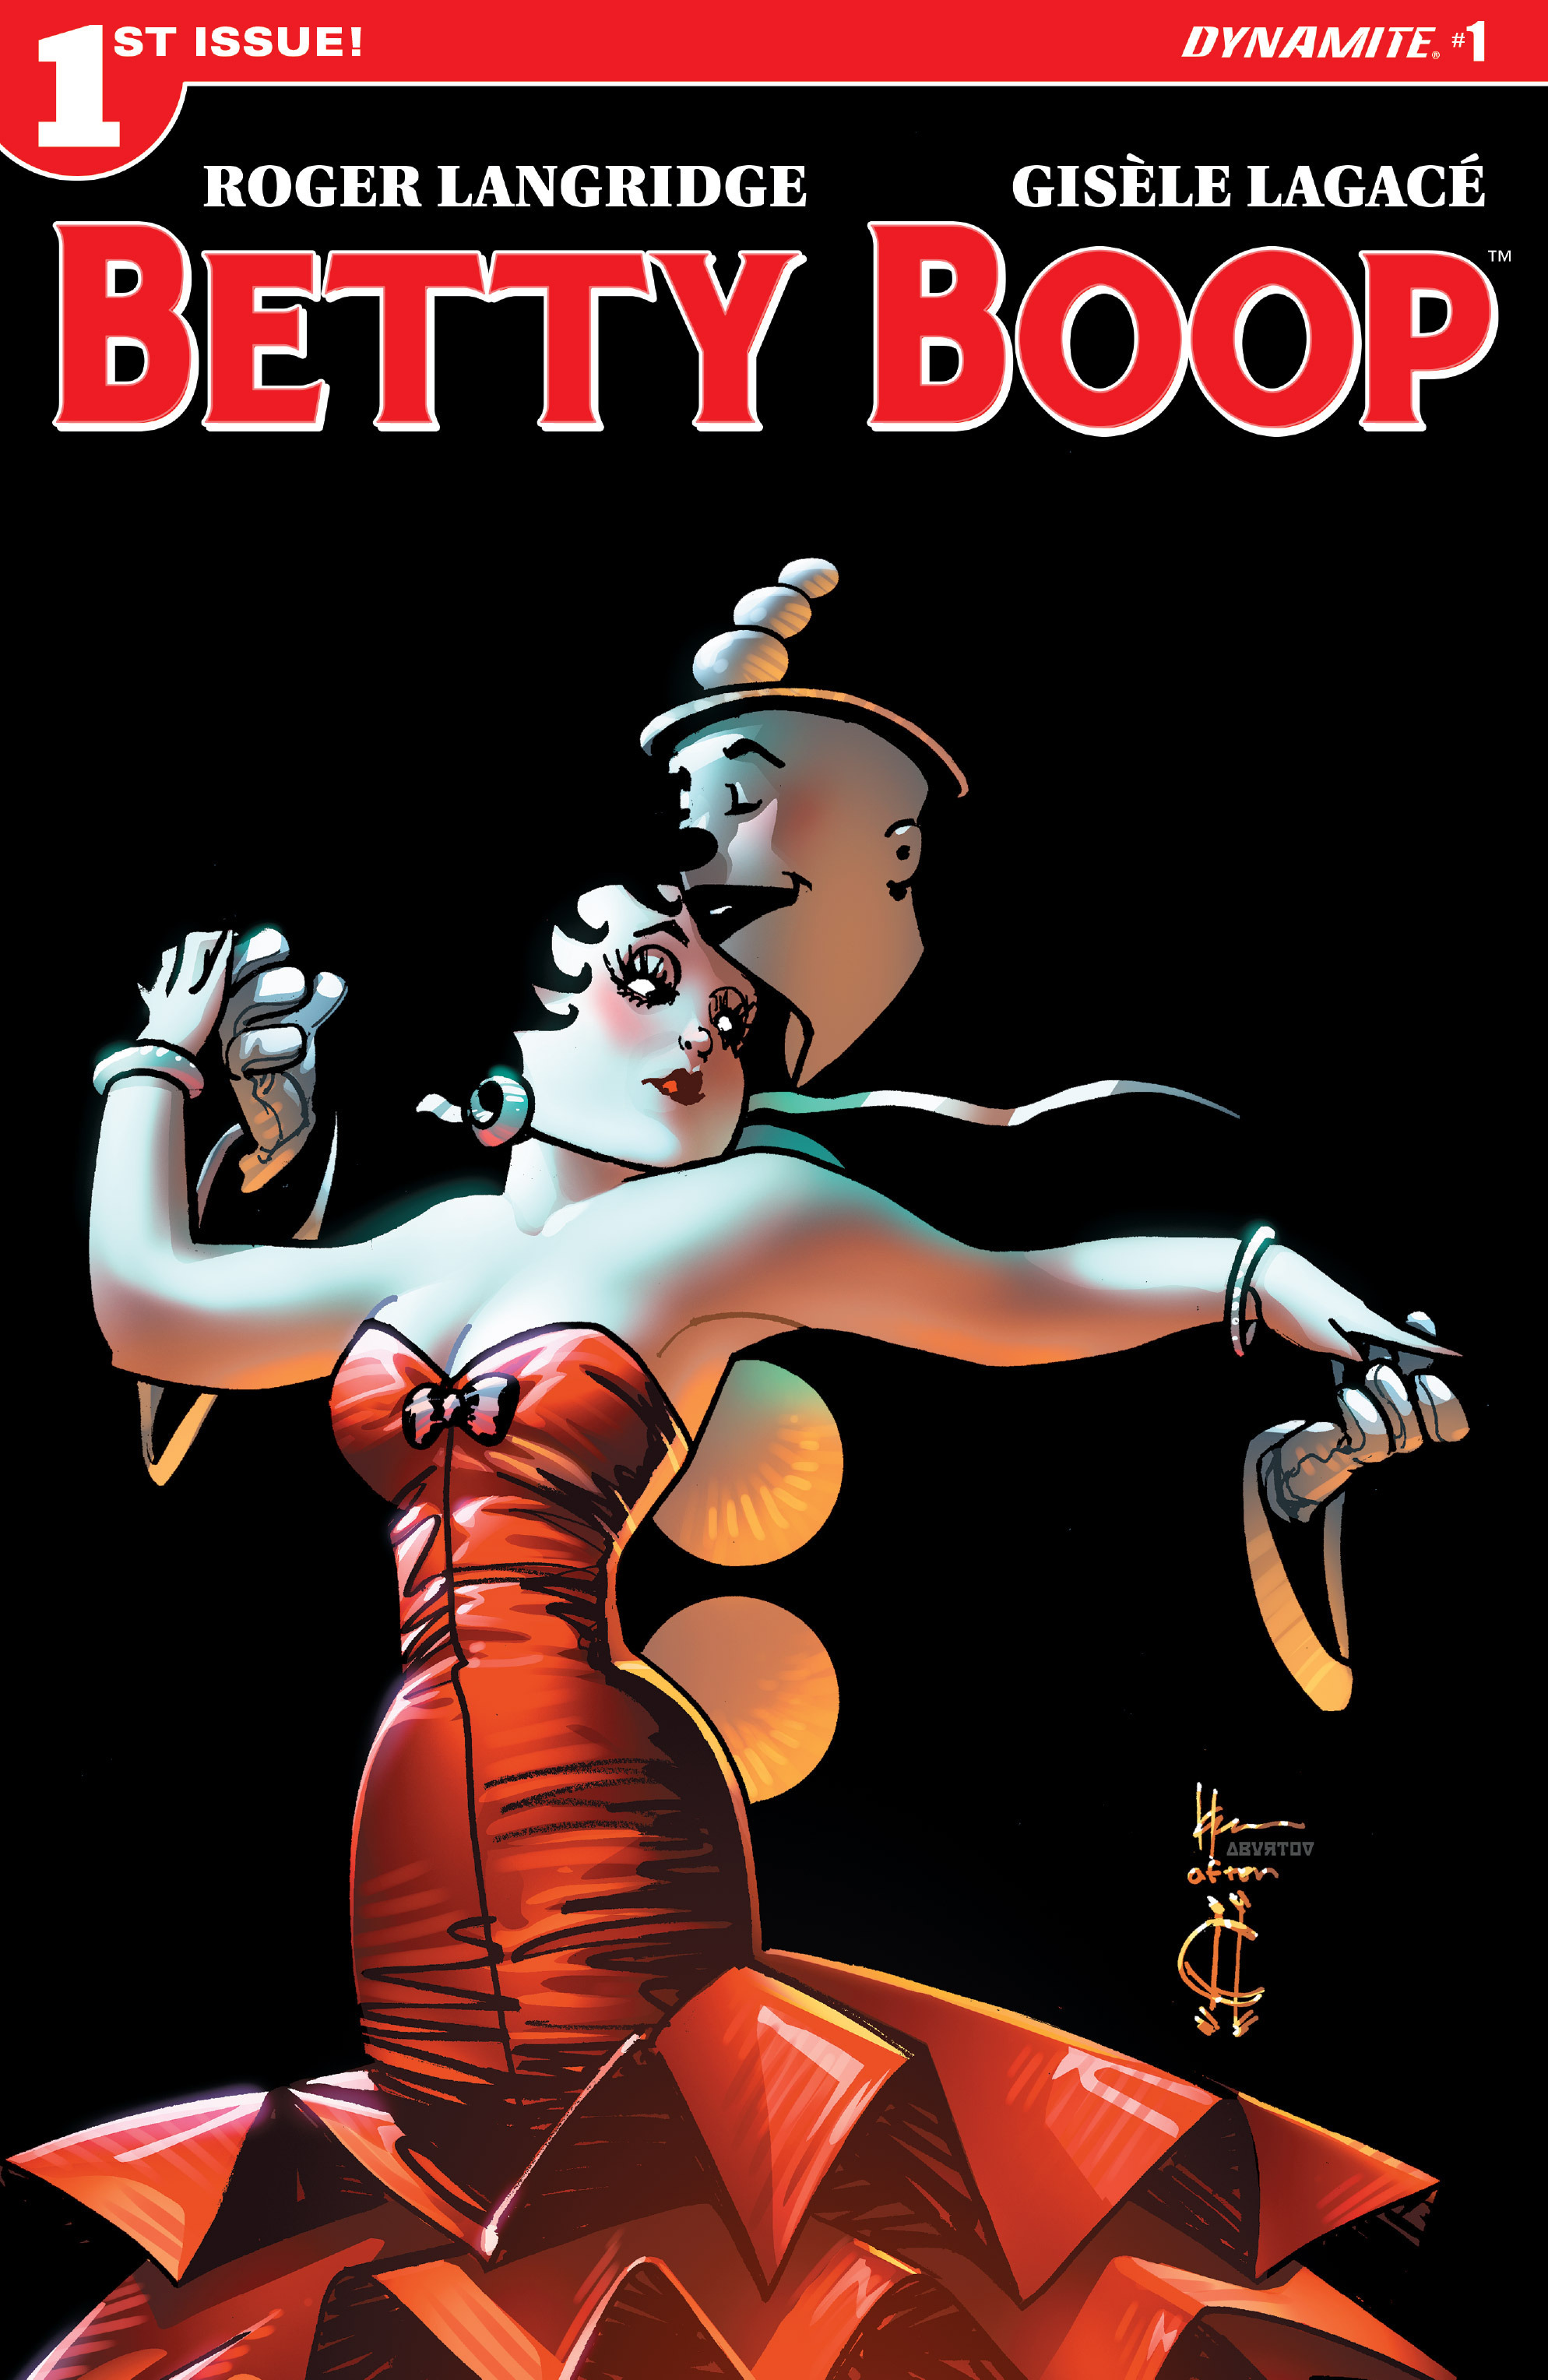 Read online Betty Boop comic -  Issue #1 - 1